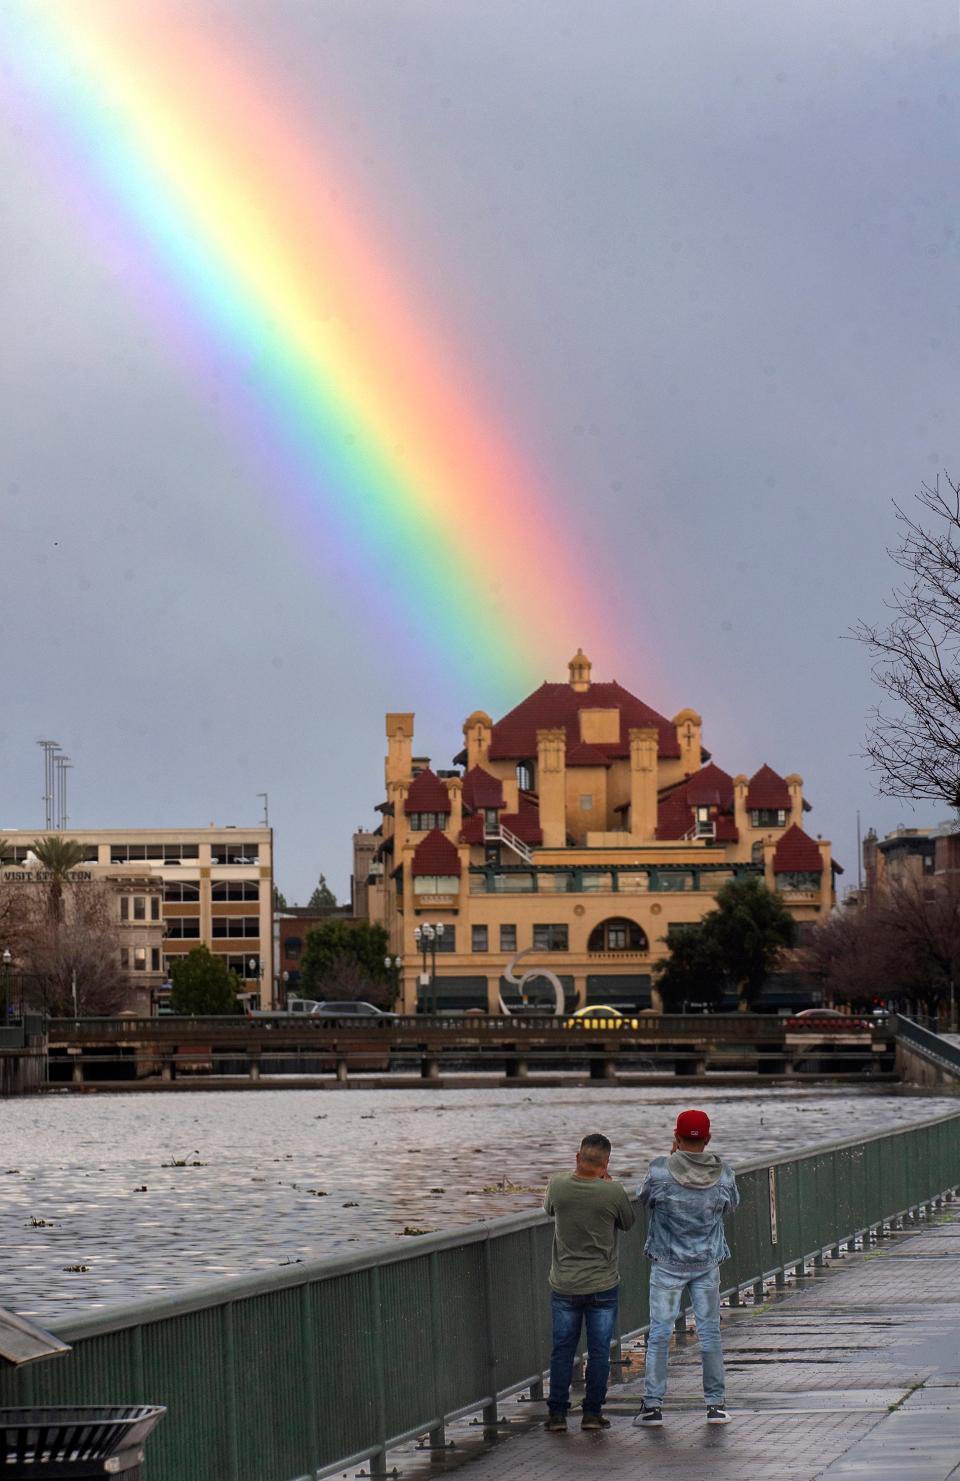 A rainbow appeared over the Hotel Stockton during a break between storms in downtown Stockton on Tuesday, Jan. 10, 2023. 